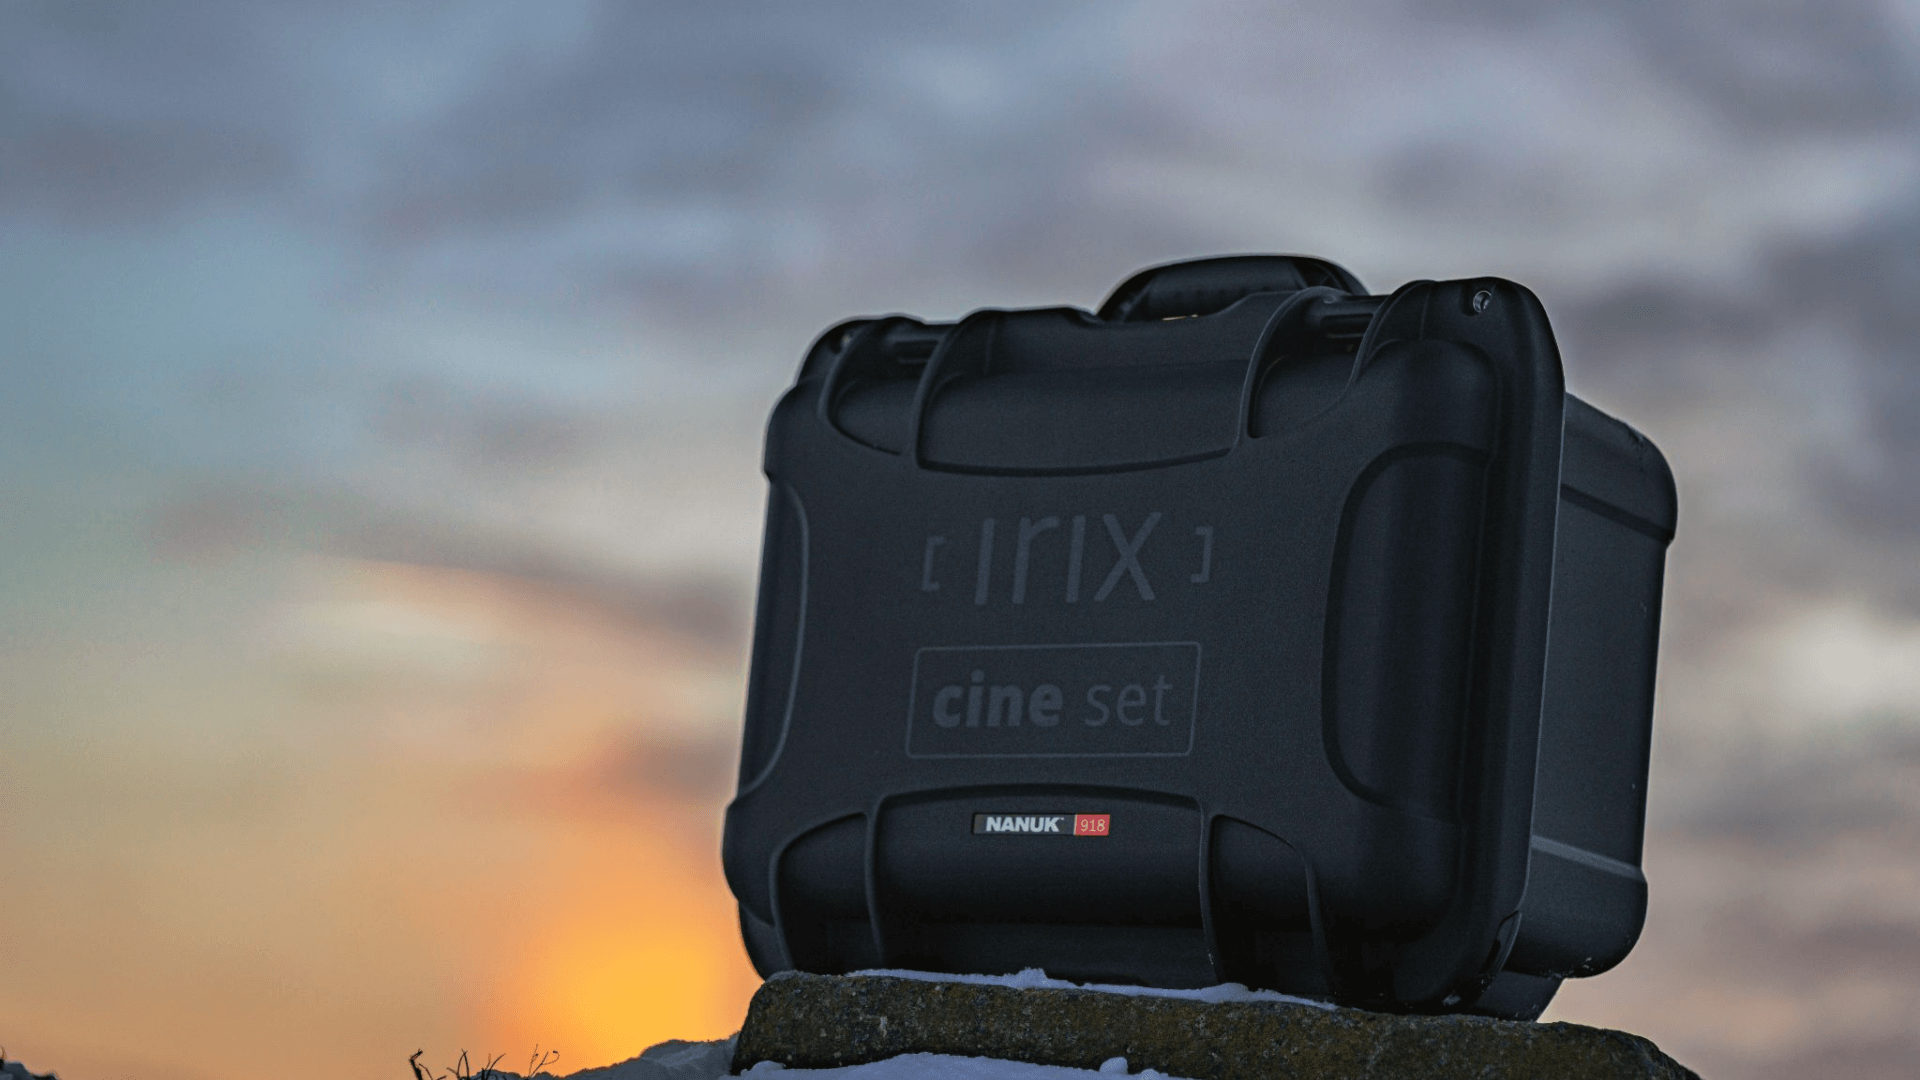 Irix release lens sets and dedicated case for movie creators